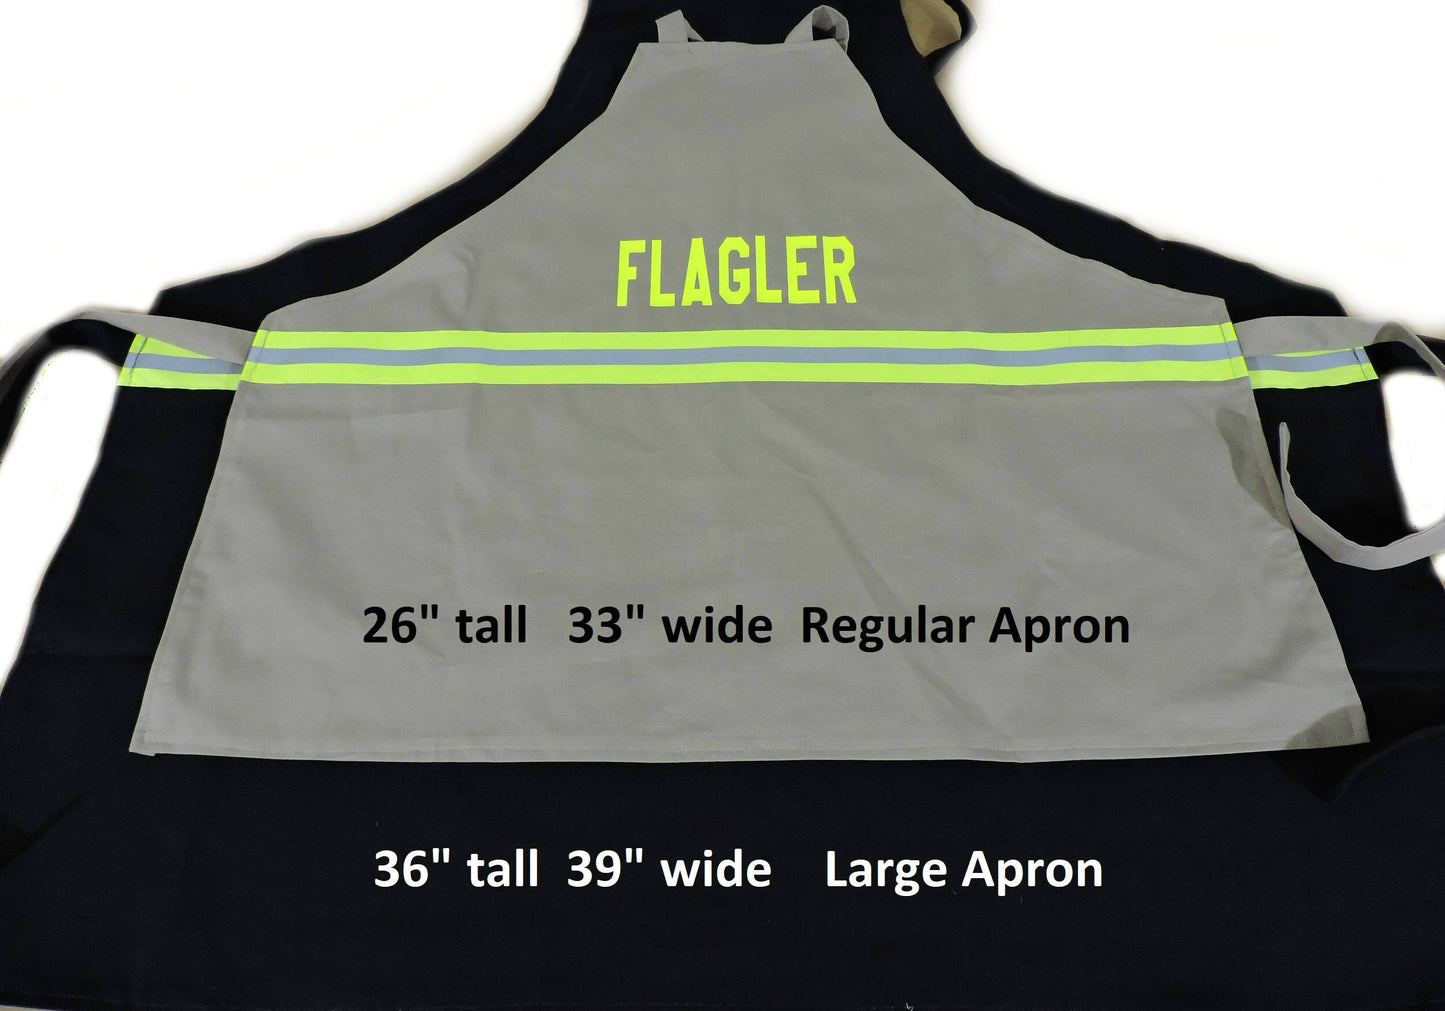 Sizes of the firefighter aprons